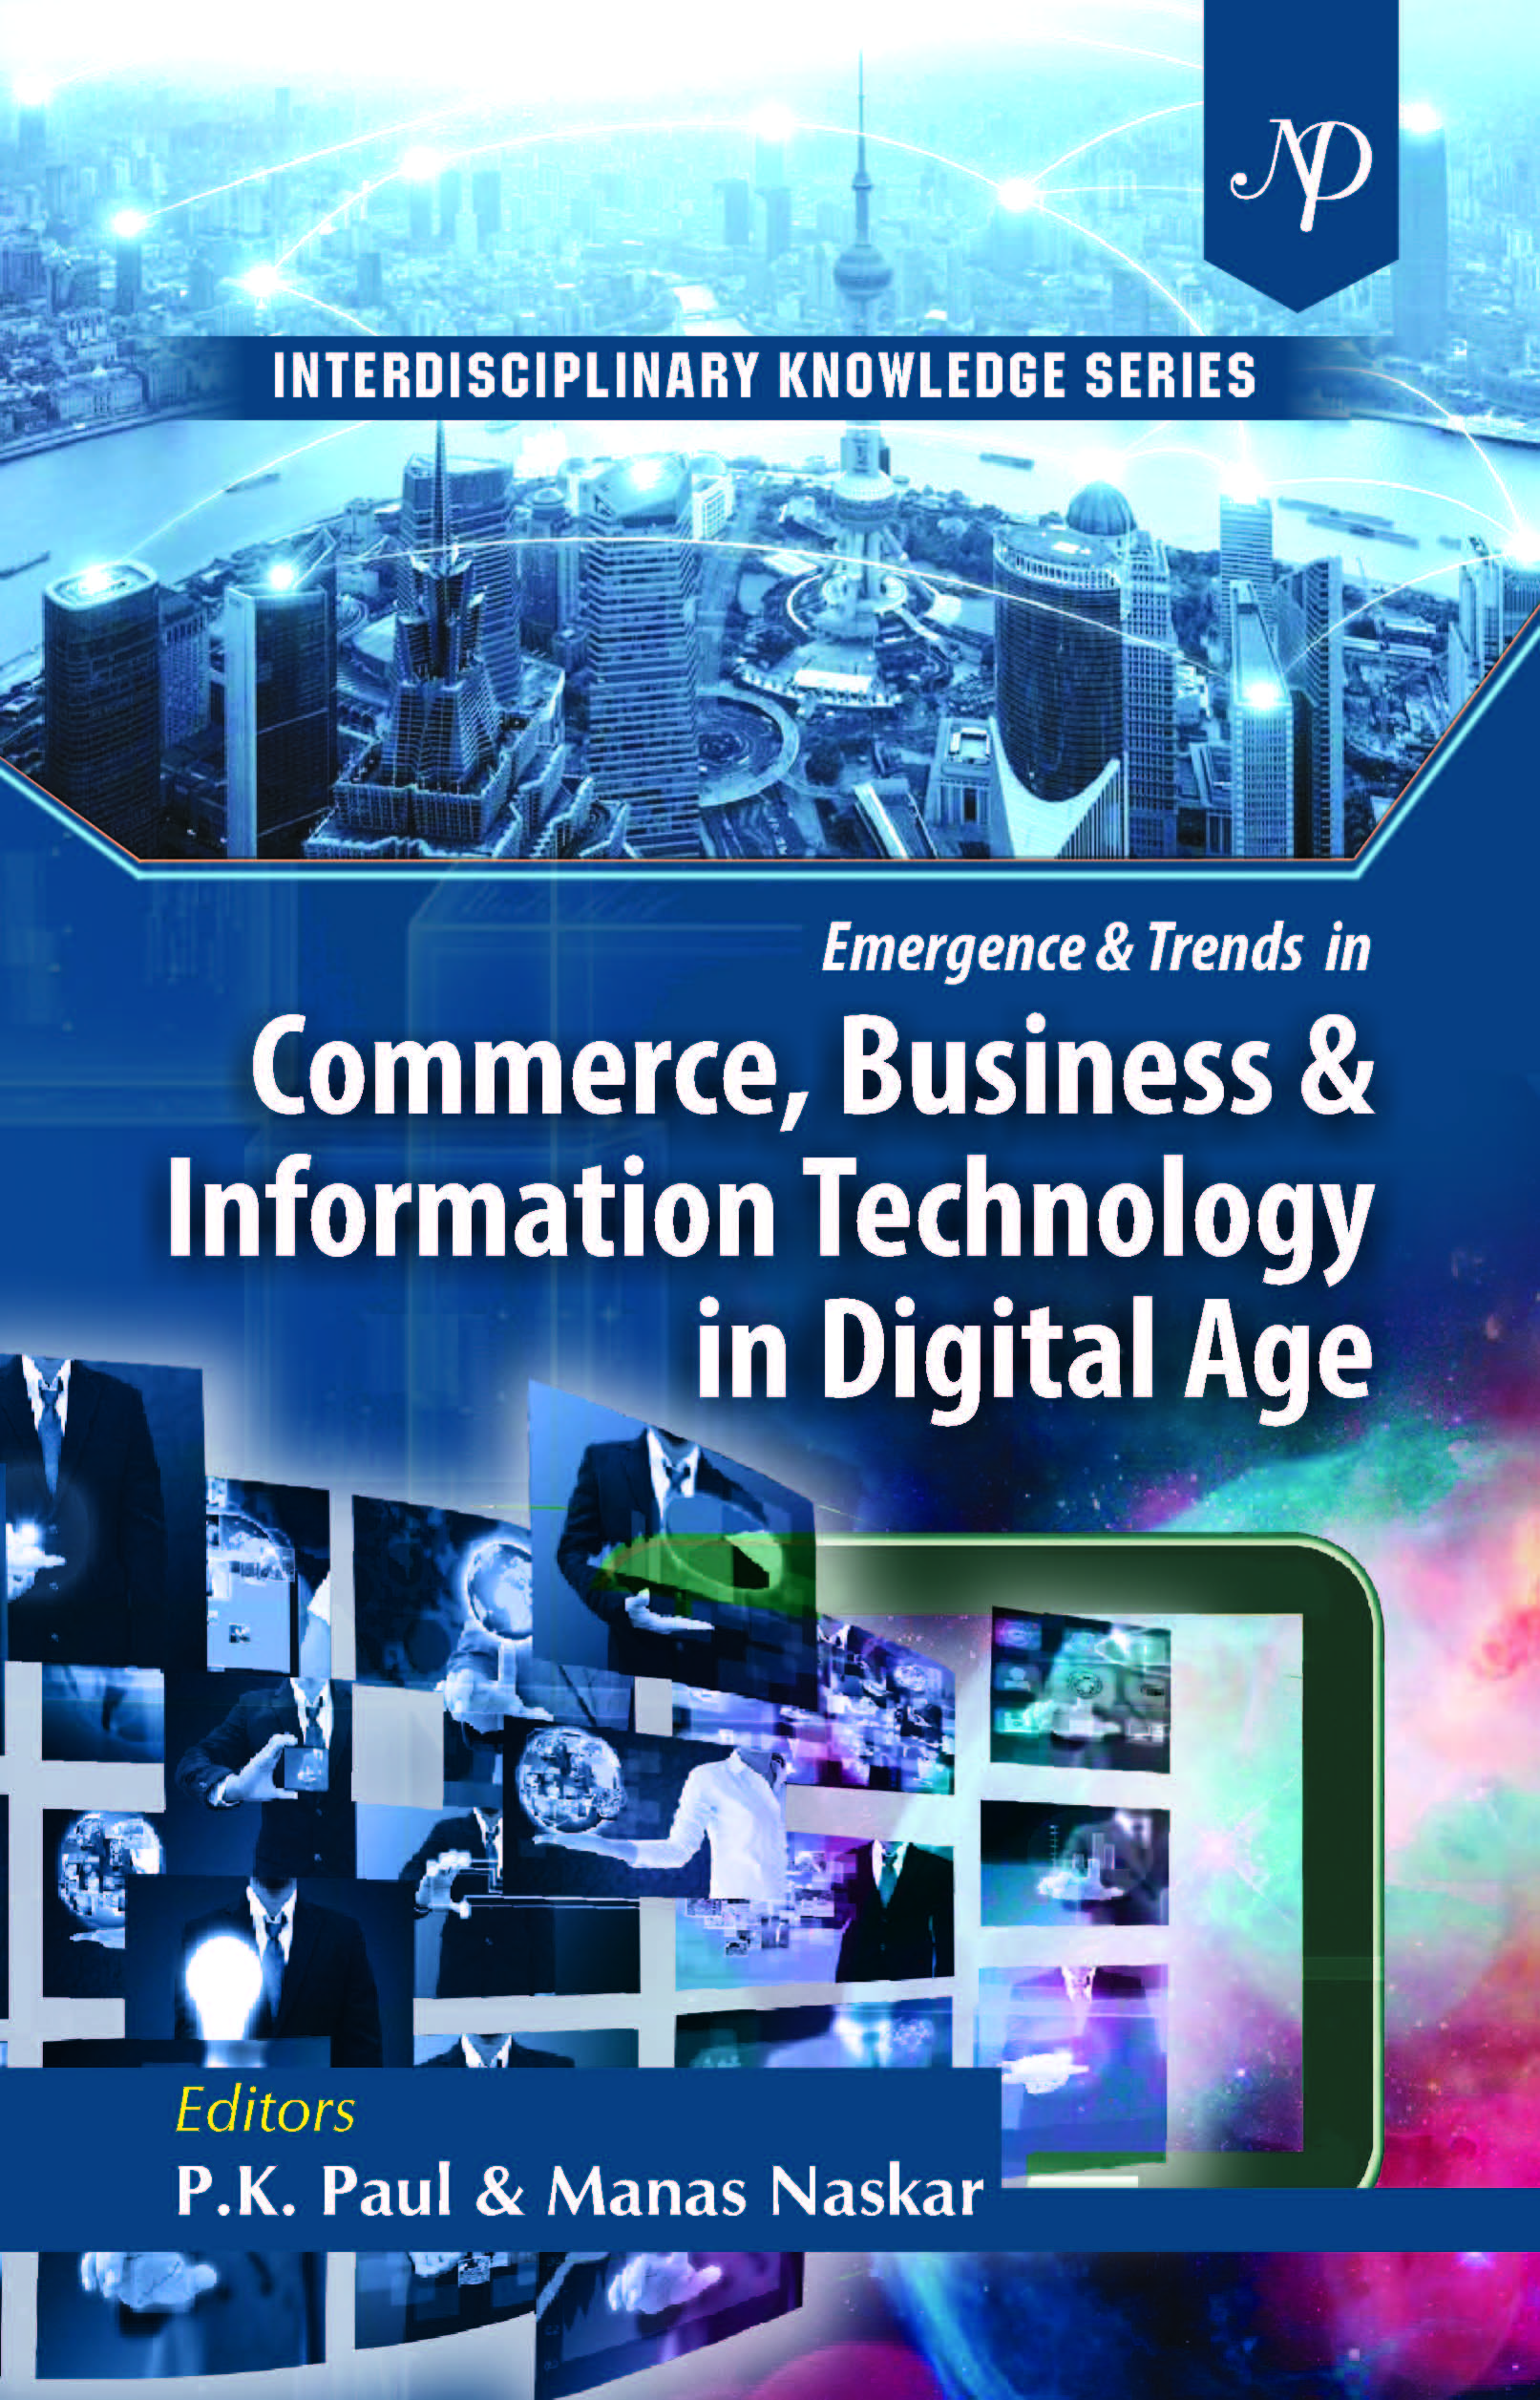 Emergence & Trends in Commerce, Business & Information Technology in Digital Age